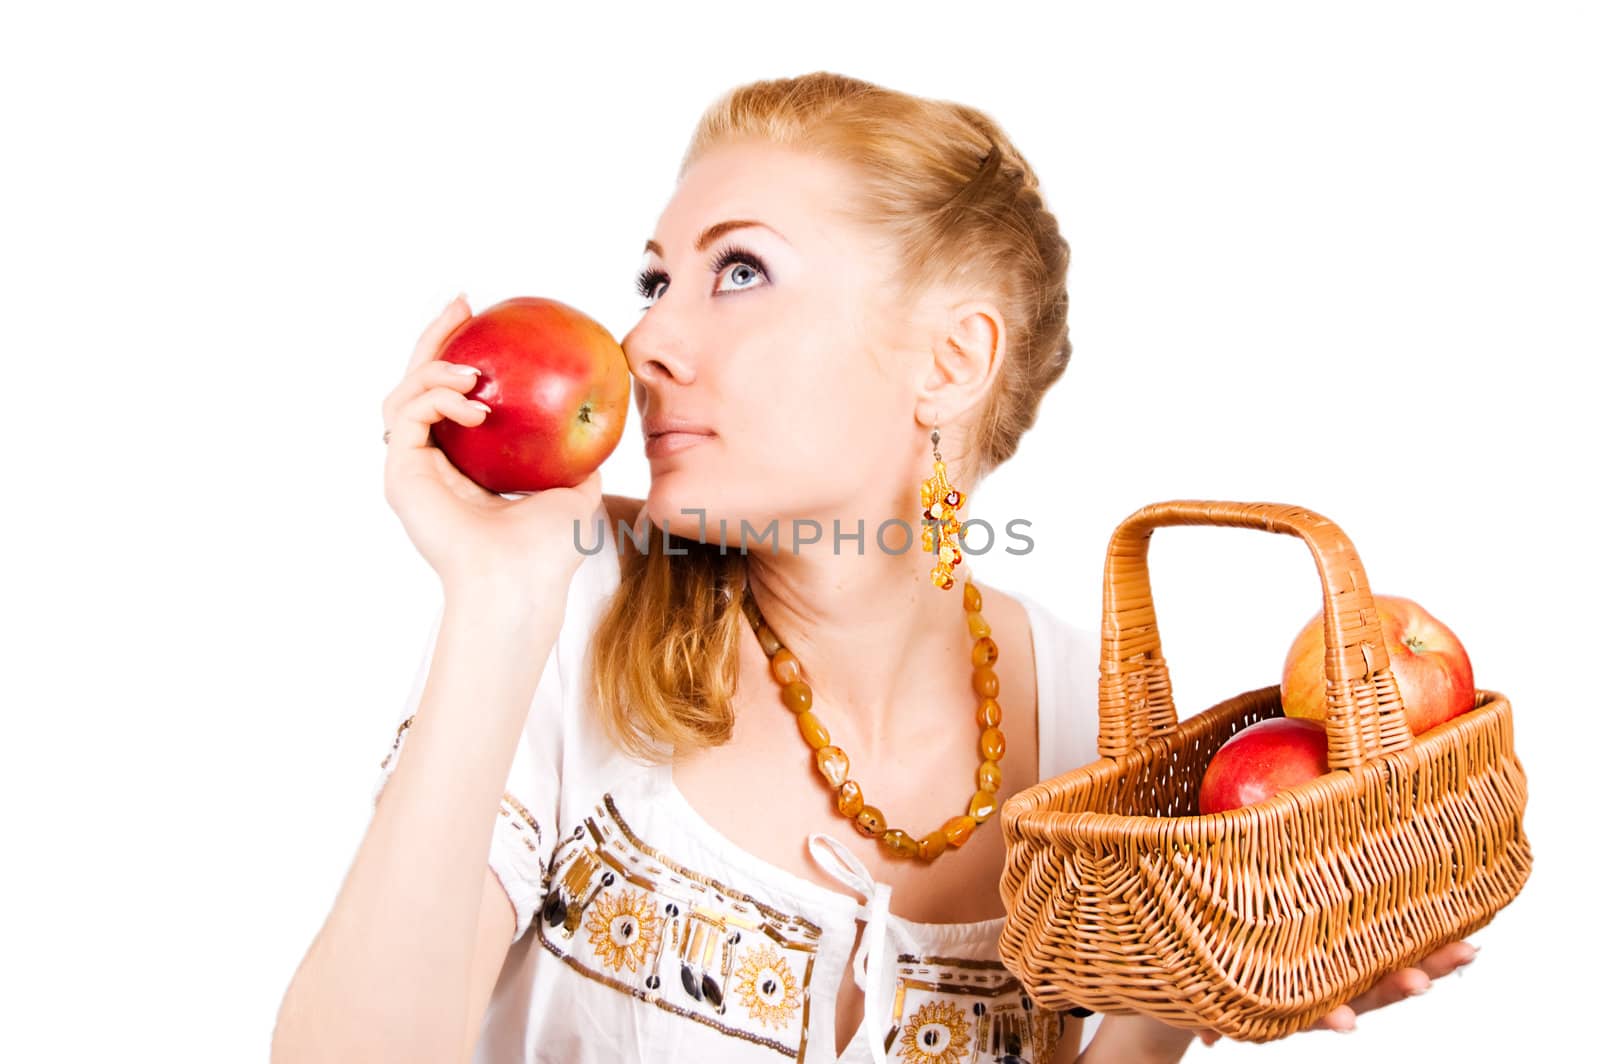 Redheaded woman smelling red apple over white